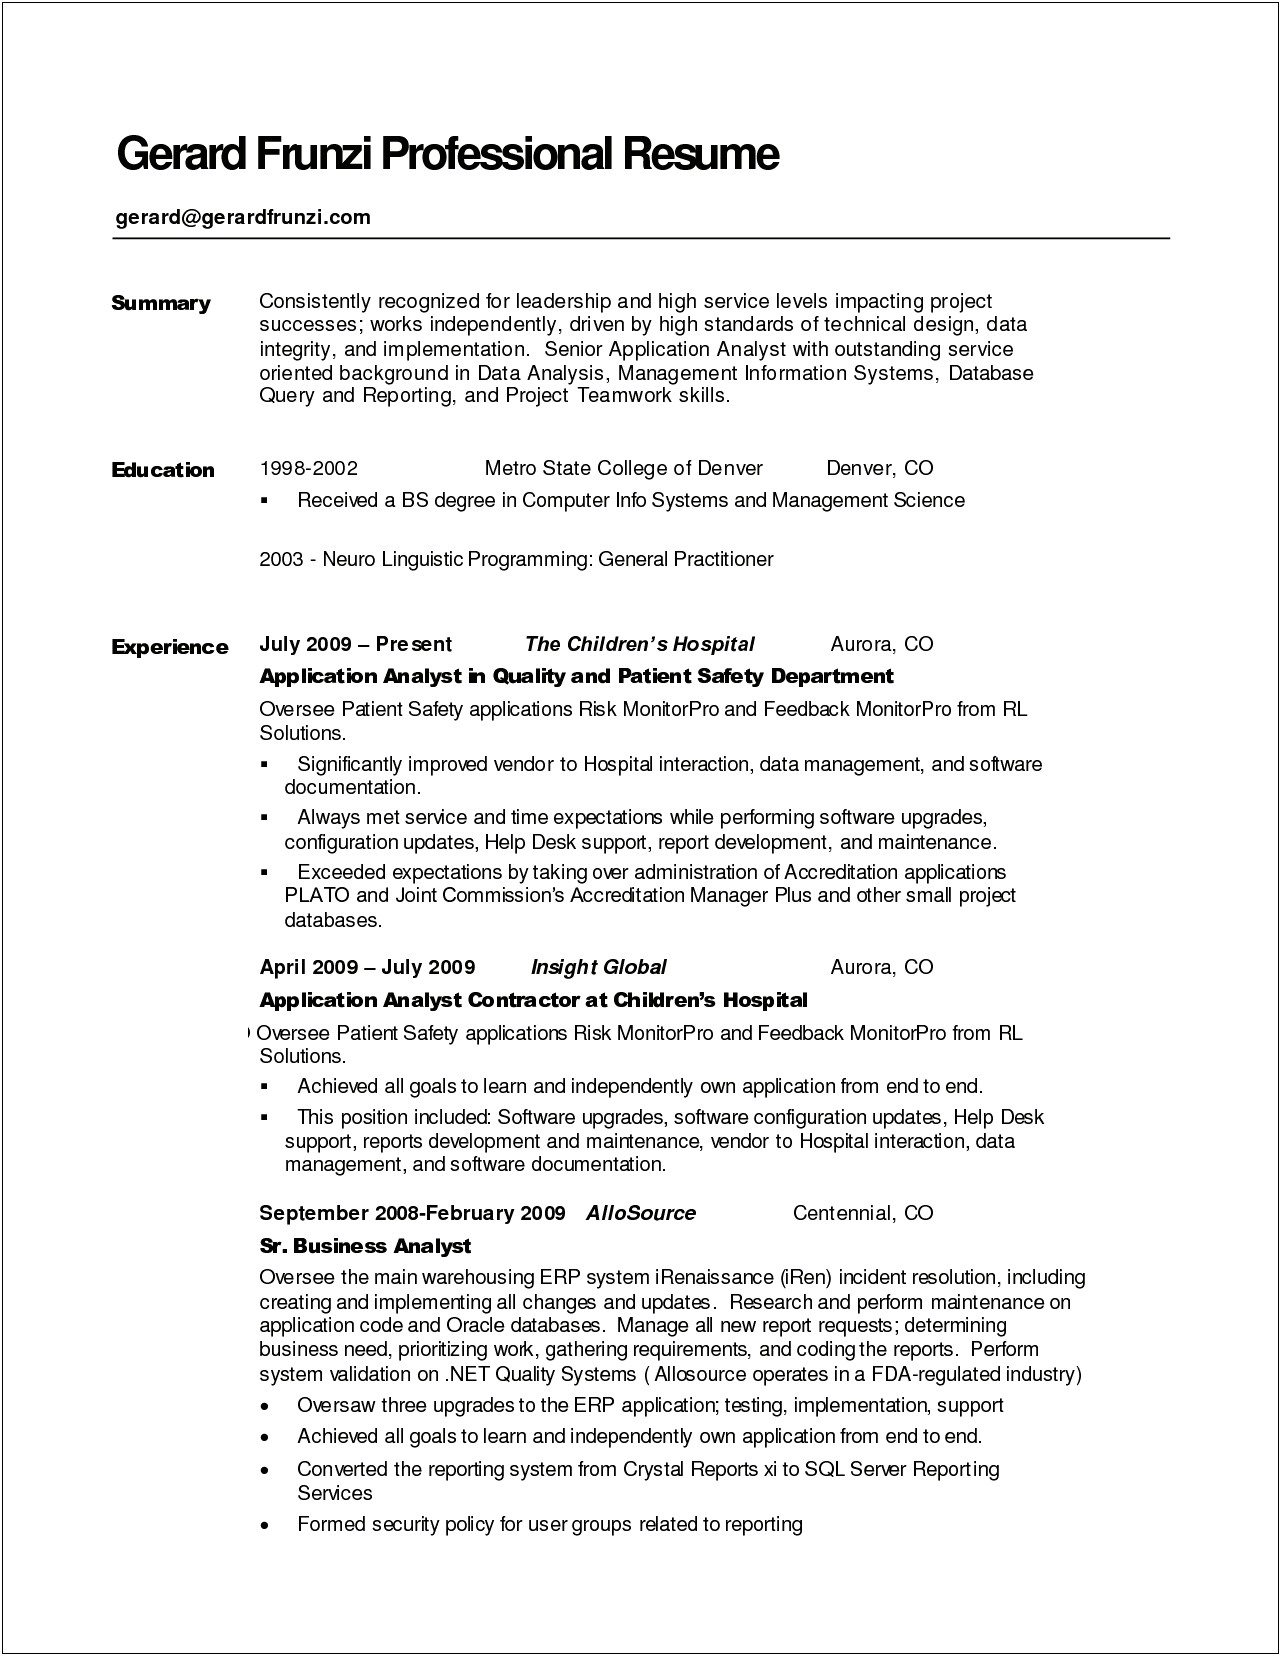 Best Professional Summary For Resumes